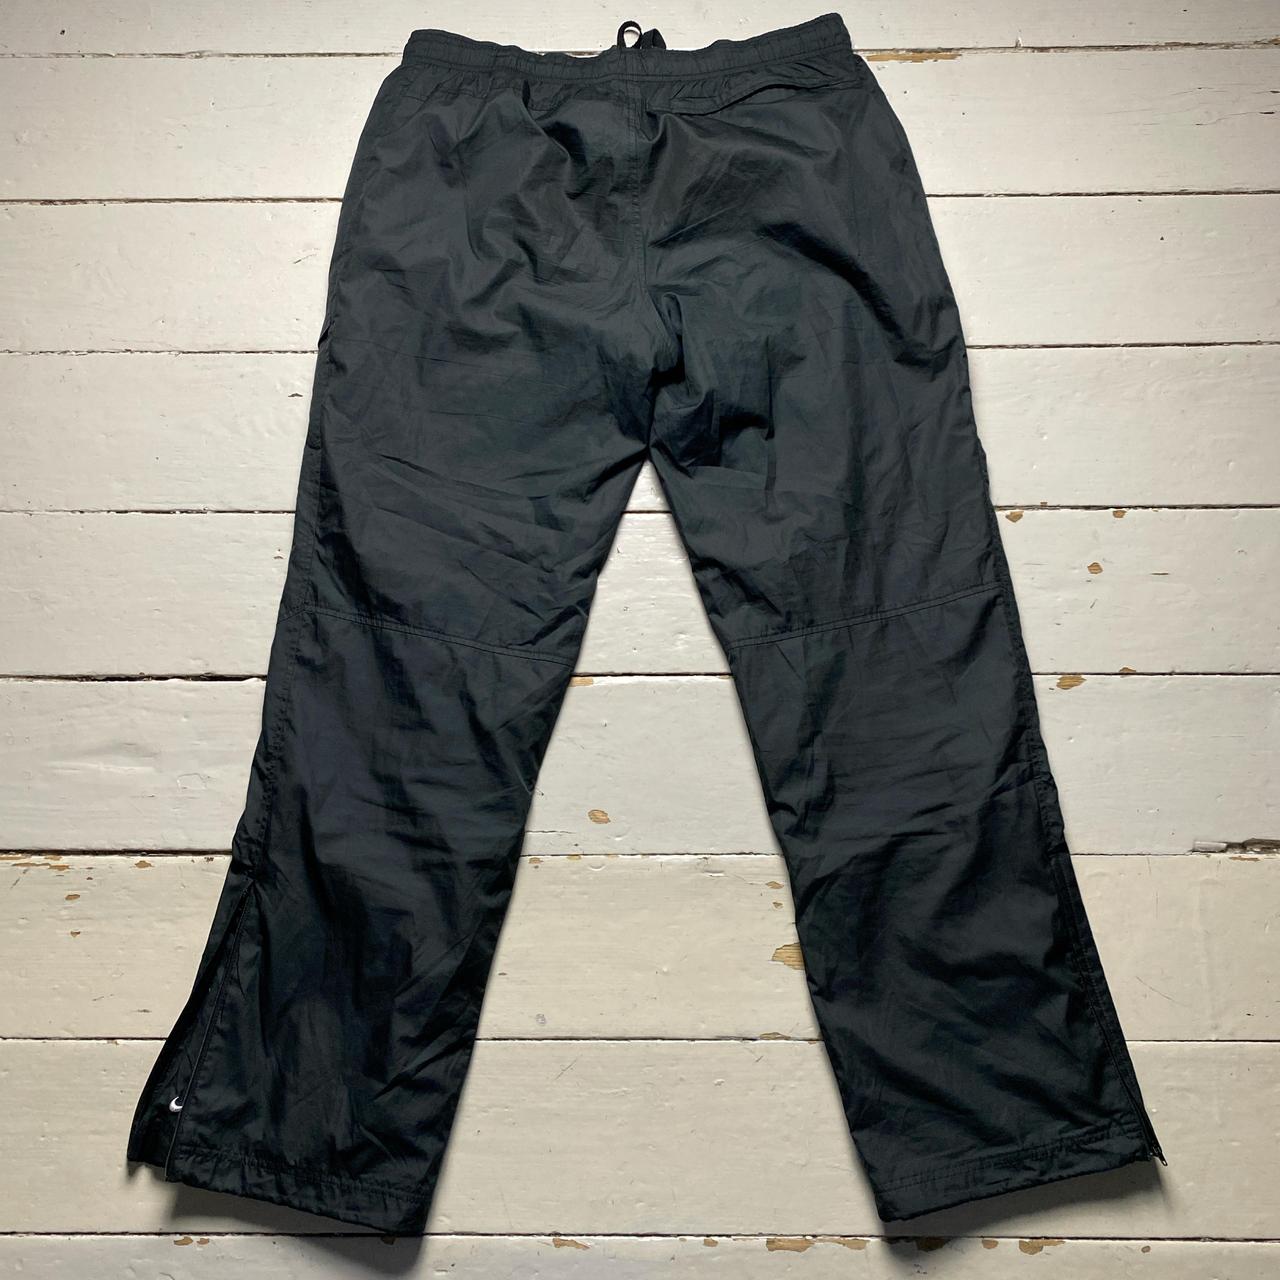 Nike Swoosh Black and White Baggy Shell Trackpant Bottoms